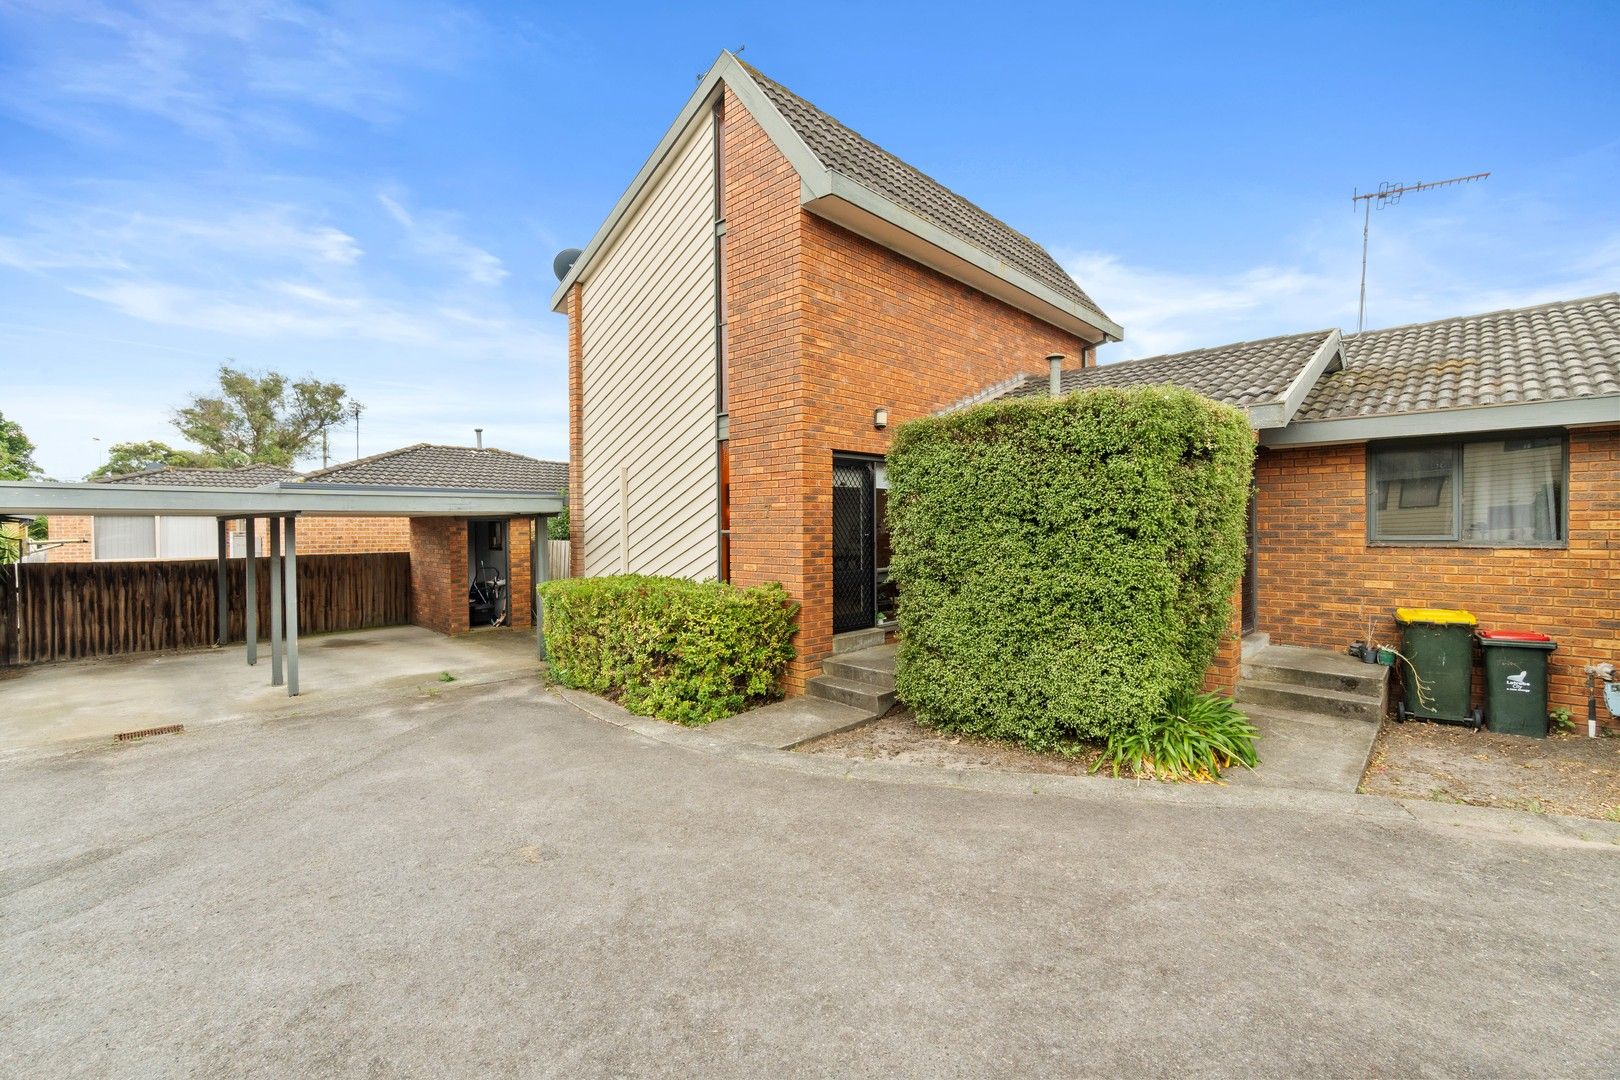 2 bedrooms Apartment / Unit / Flat in 7/28-30 George Street TRARALGON VIC, 3844